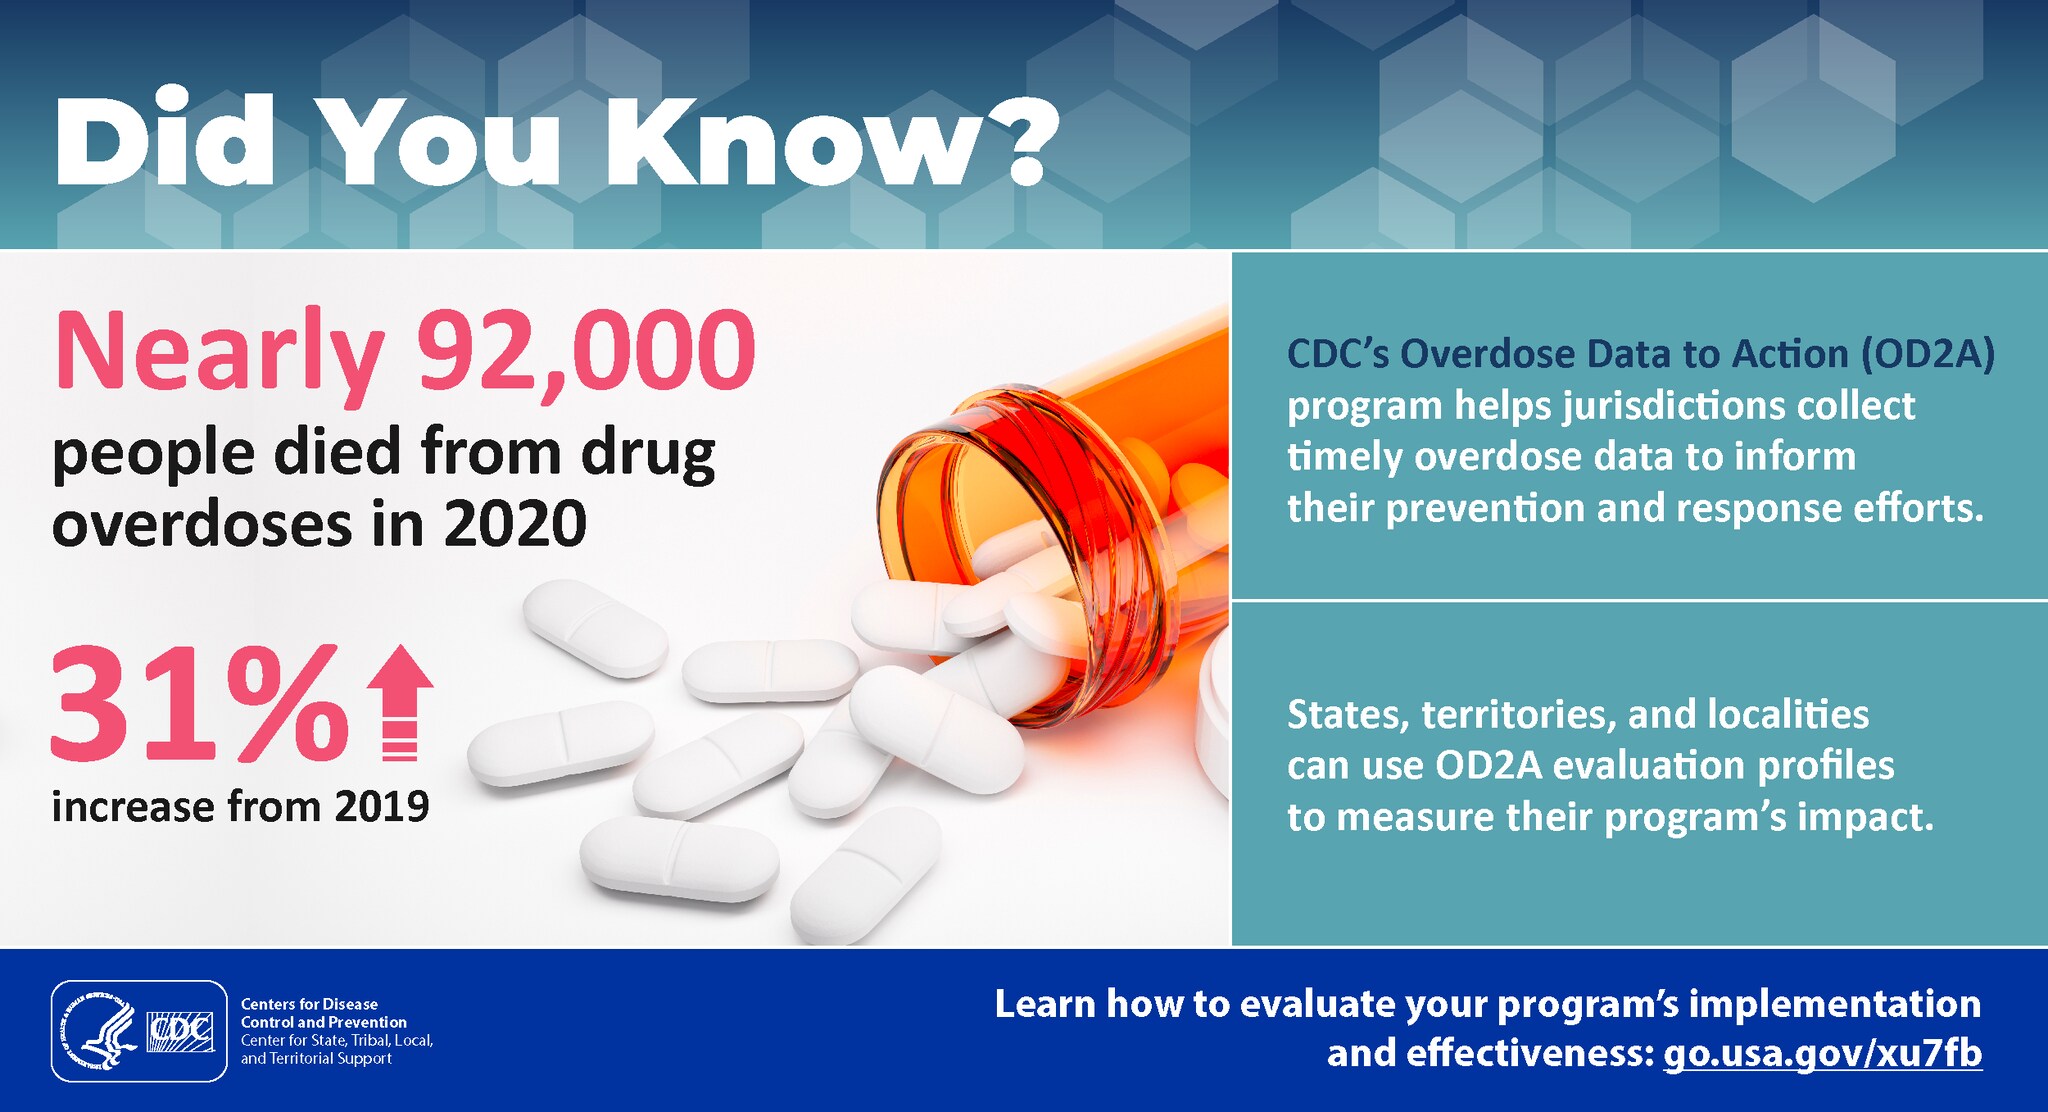 Did You Know? Nearly 92,000 people died from drug overdoses in 2020, a 31% increase from 2019. CDC’s Data Overdose to Action (OD2A) program helps jurisdictions collect timely overdose data to inform their prevention and response efforts. States, territories, and localities can use OD2A evaluation profiles to measure their program’s impact. Learn how to evaluate your program’s implementation and effectiveness https://go.usa.gov/xu7fb